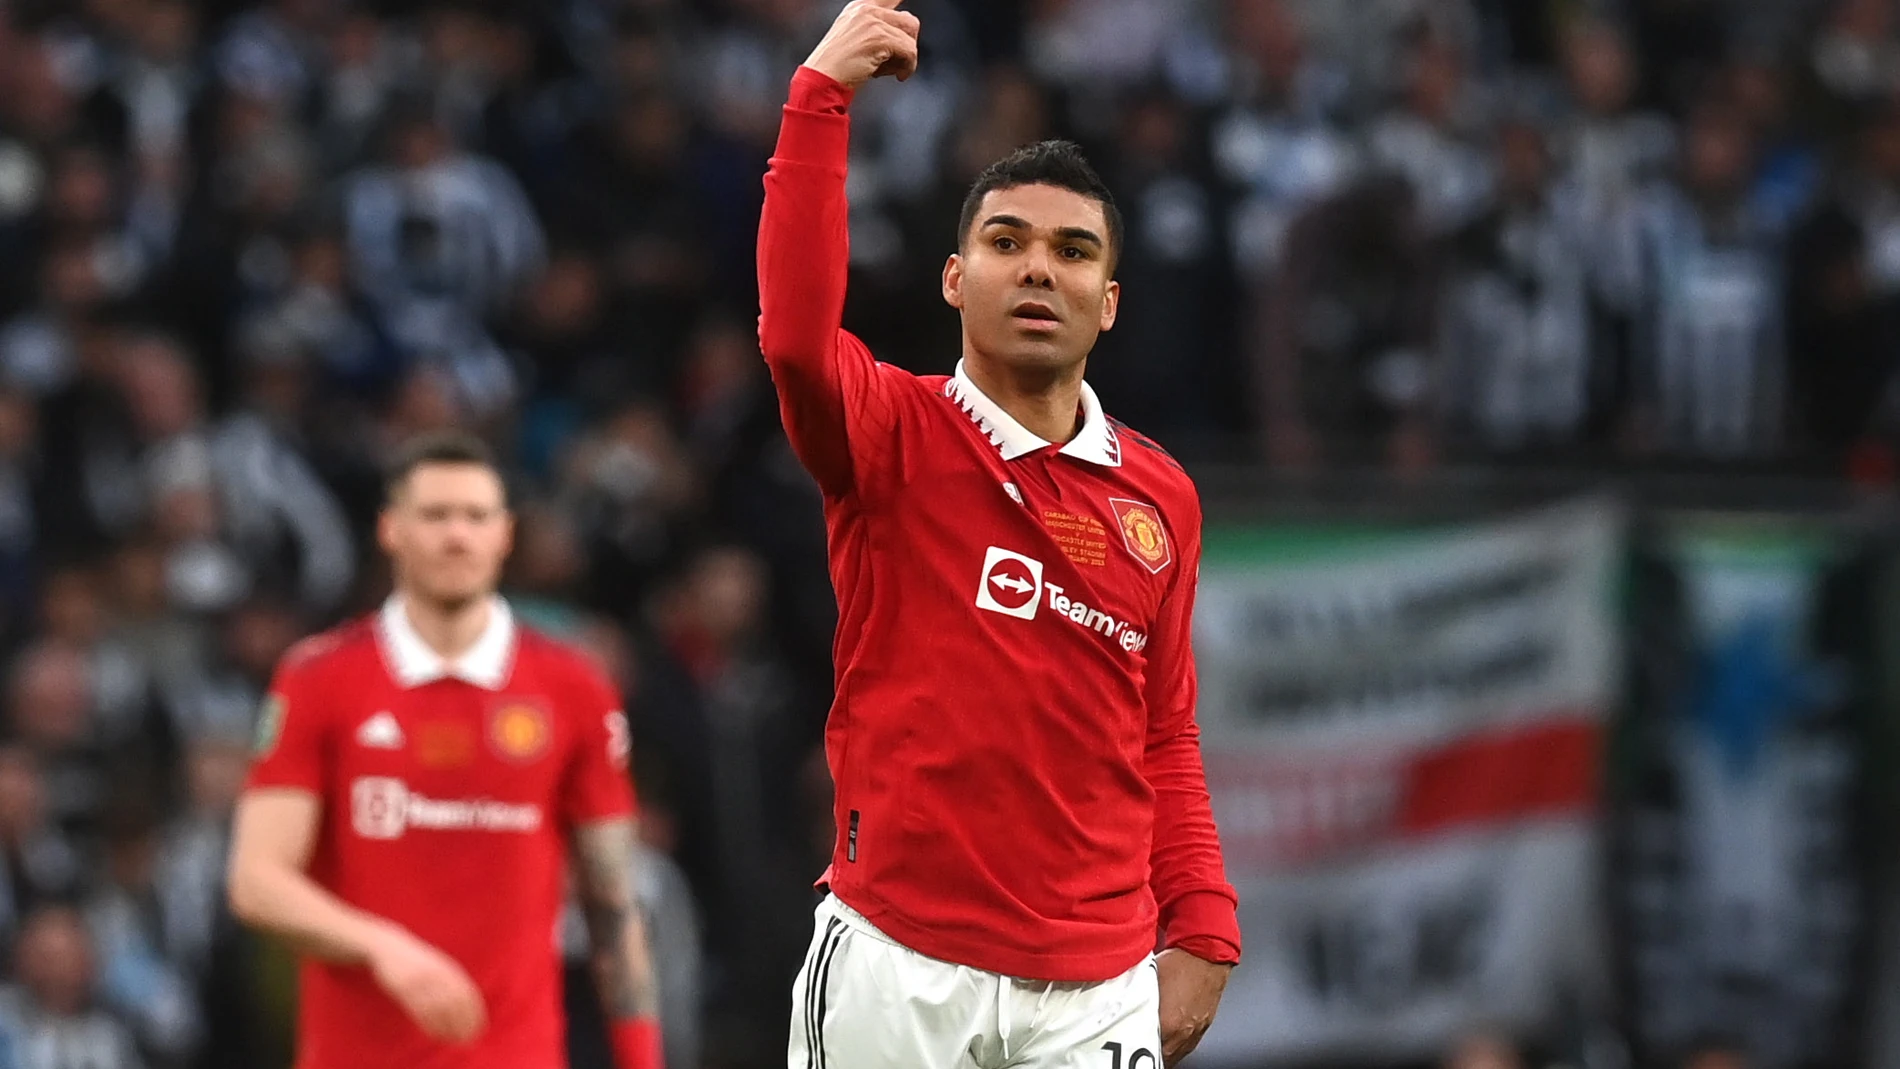 London (United Kingdom), 26/02/2023.- Manchester United's Casemiro celebrates after scoring his teams first goal during the Carabao Cup final soccer match between Manchester United and Newcastle United, in London, Britain, 26 February 2023. (Reino Unido, Londres) EFE/EPA/NEIL HALL 